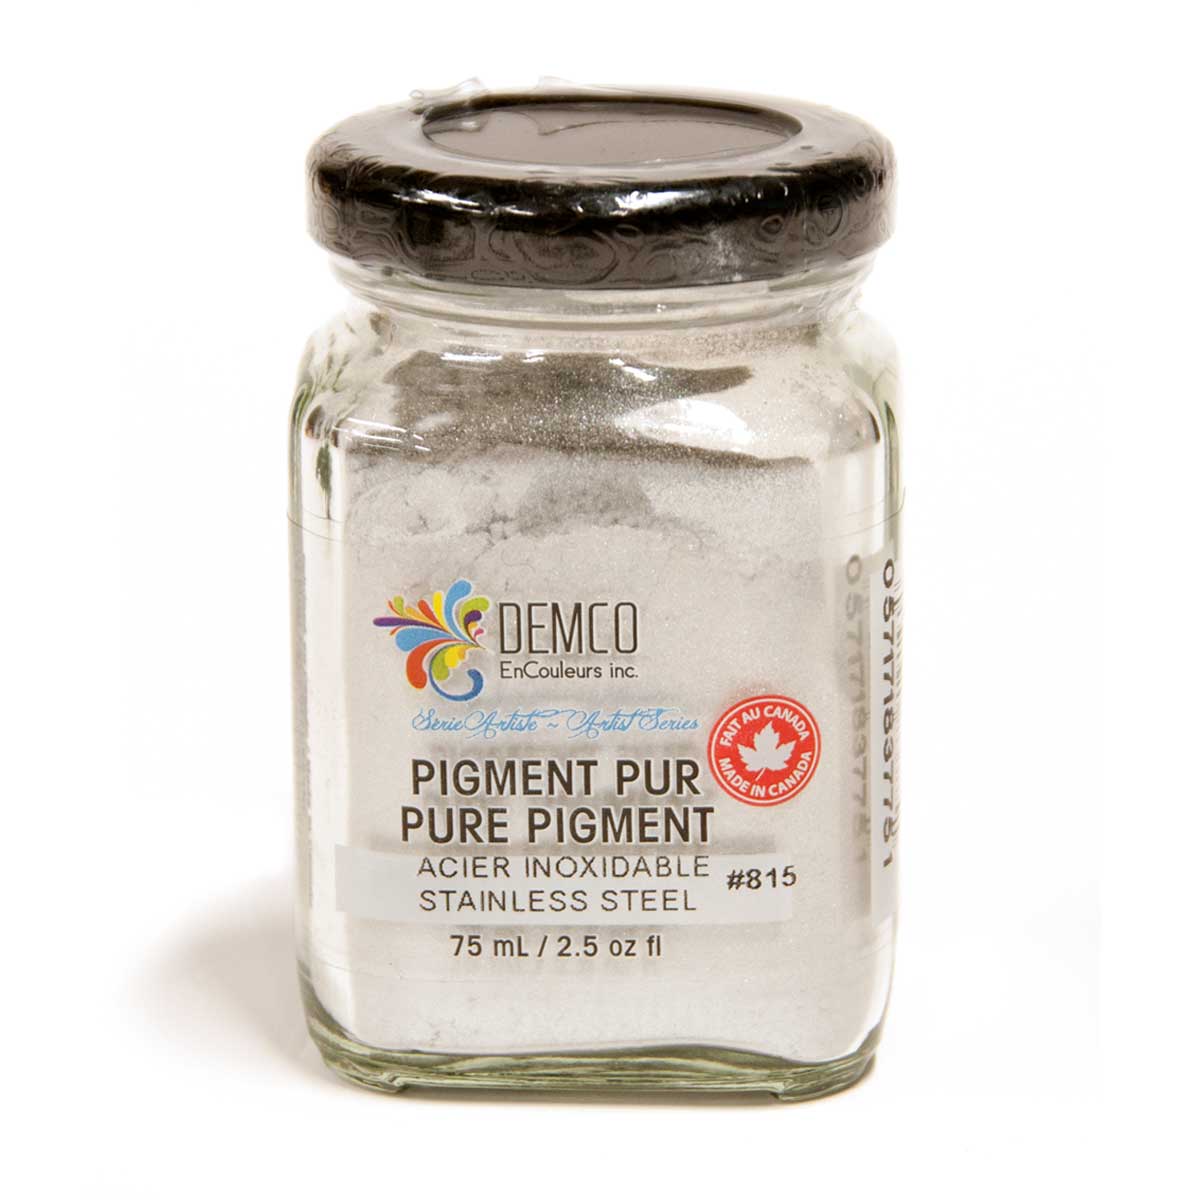 Demco Pure Pigment Artist Series 4 - Stainless Steel 75 ml